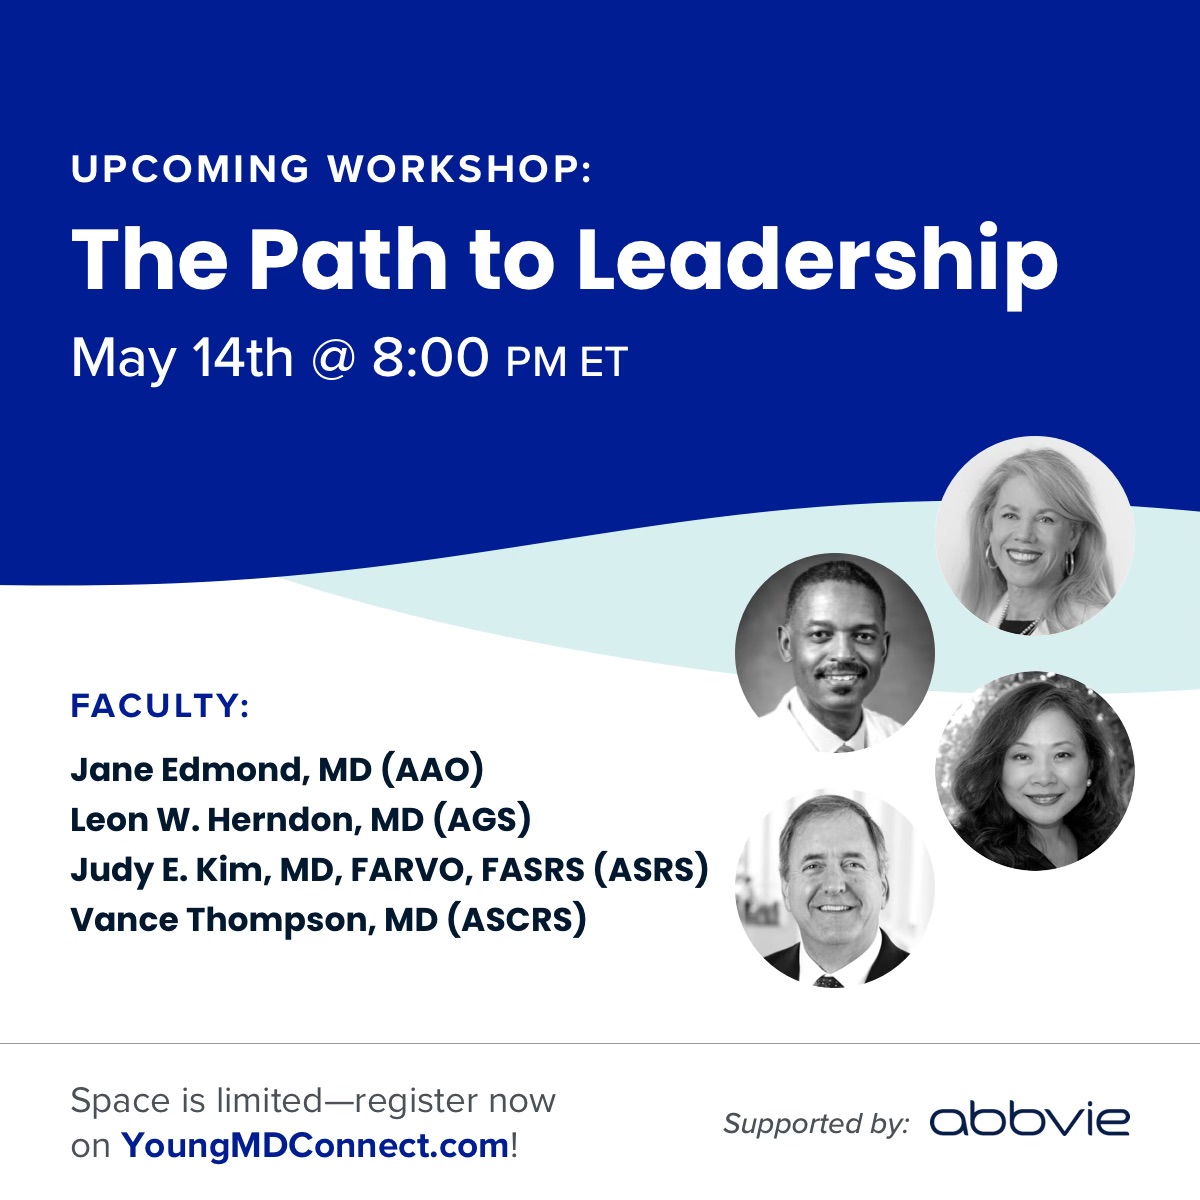 During this unique 1-hour interactive workshop, we’re bringing together leaders from AAO, AGS, ASRS, and ASCRS, to discuss their paths to leadership and how to position yourself well early in your career. 💫 Register today using the link in our bio to claim your spot!